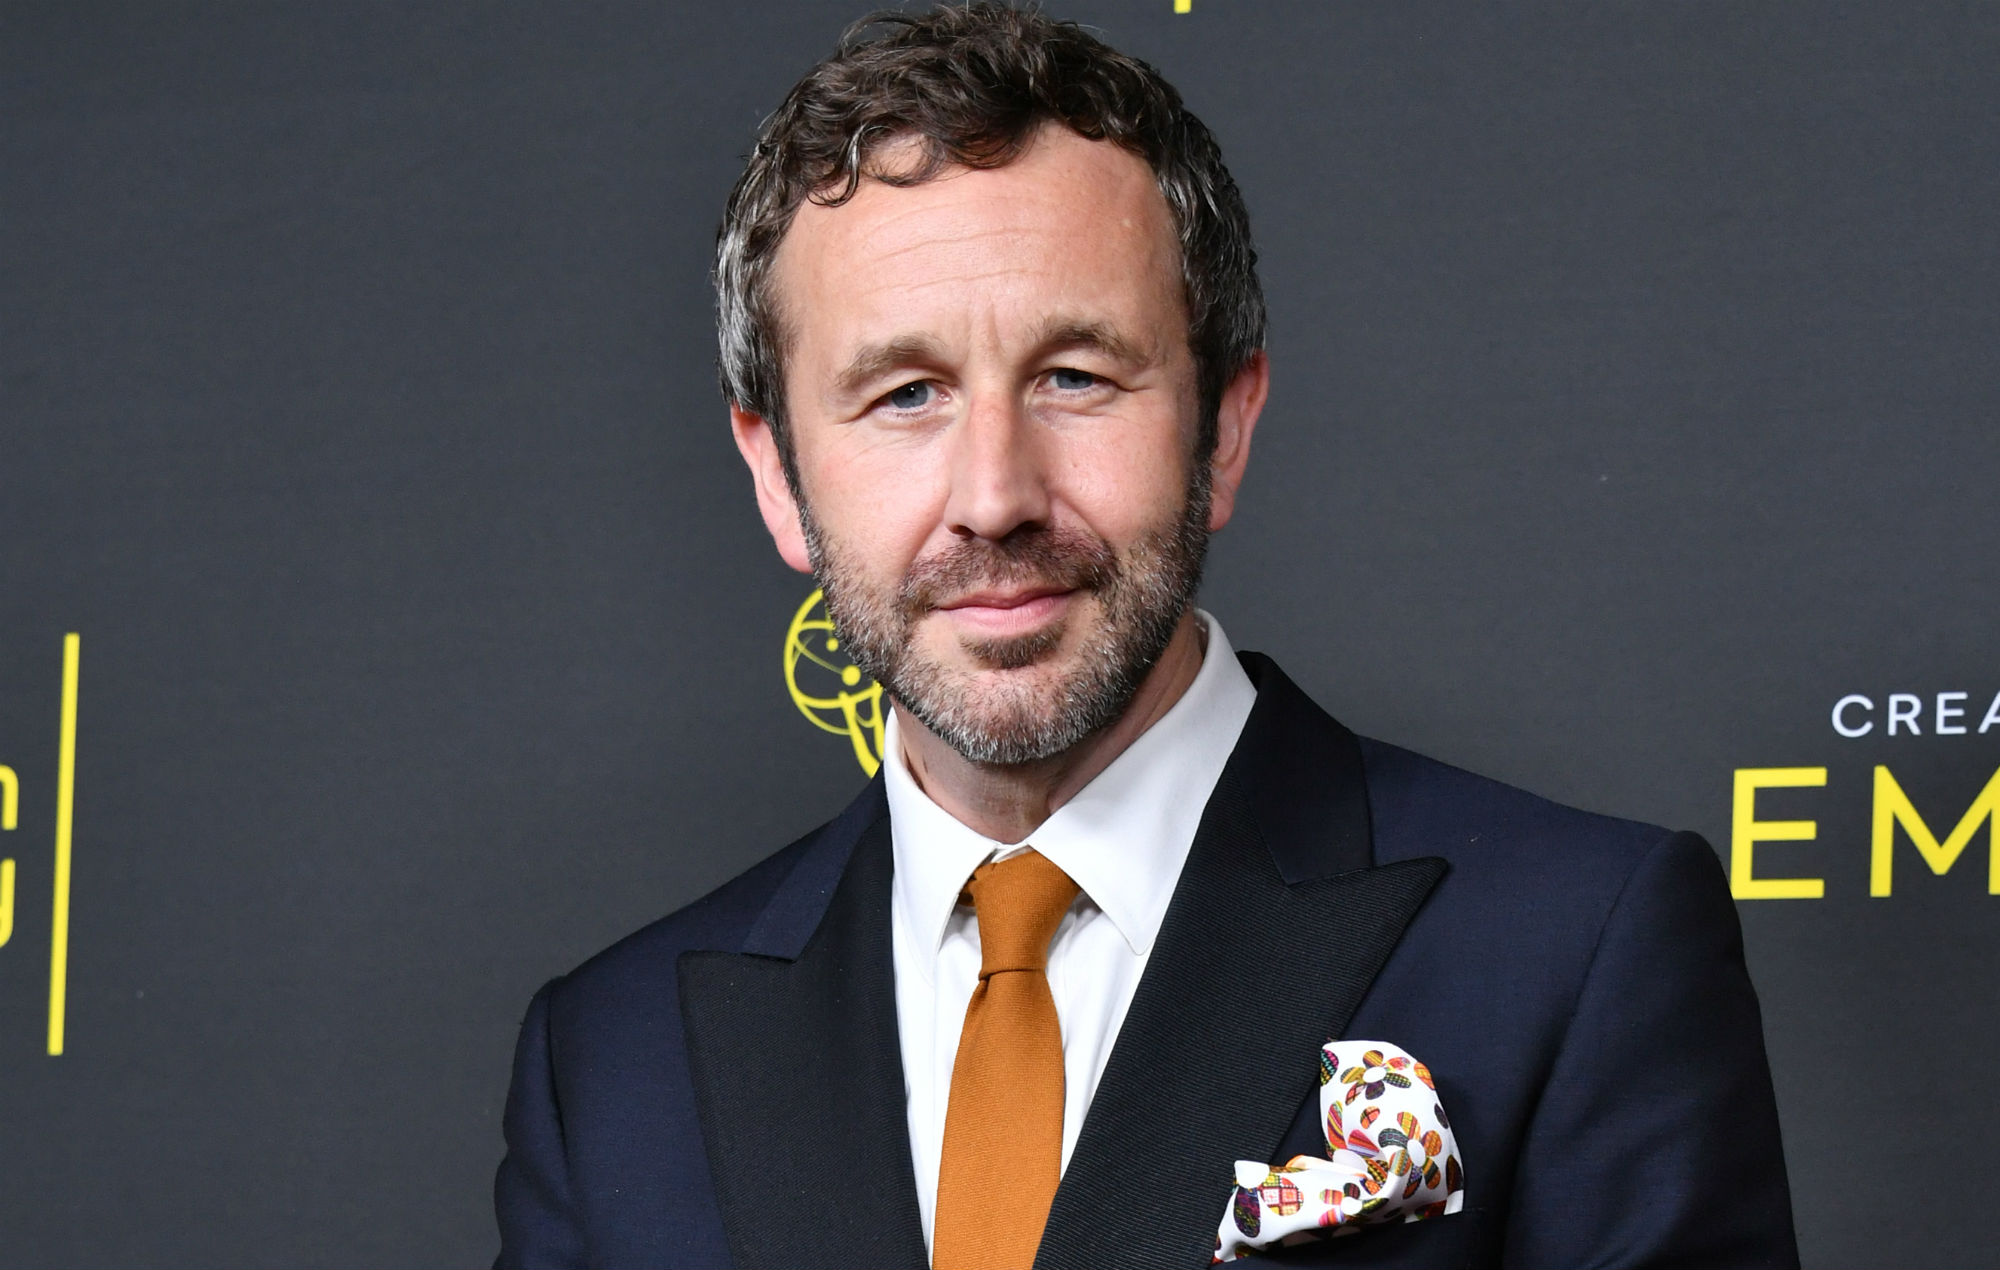 Chris O'Dowd says backlash to infamous 'Imagine' celebrity video was